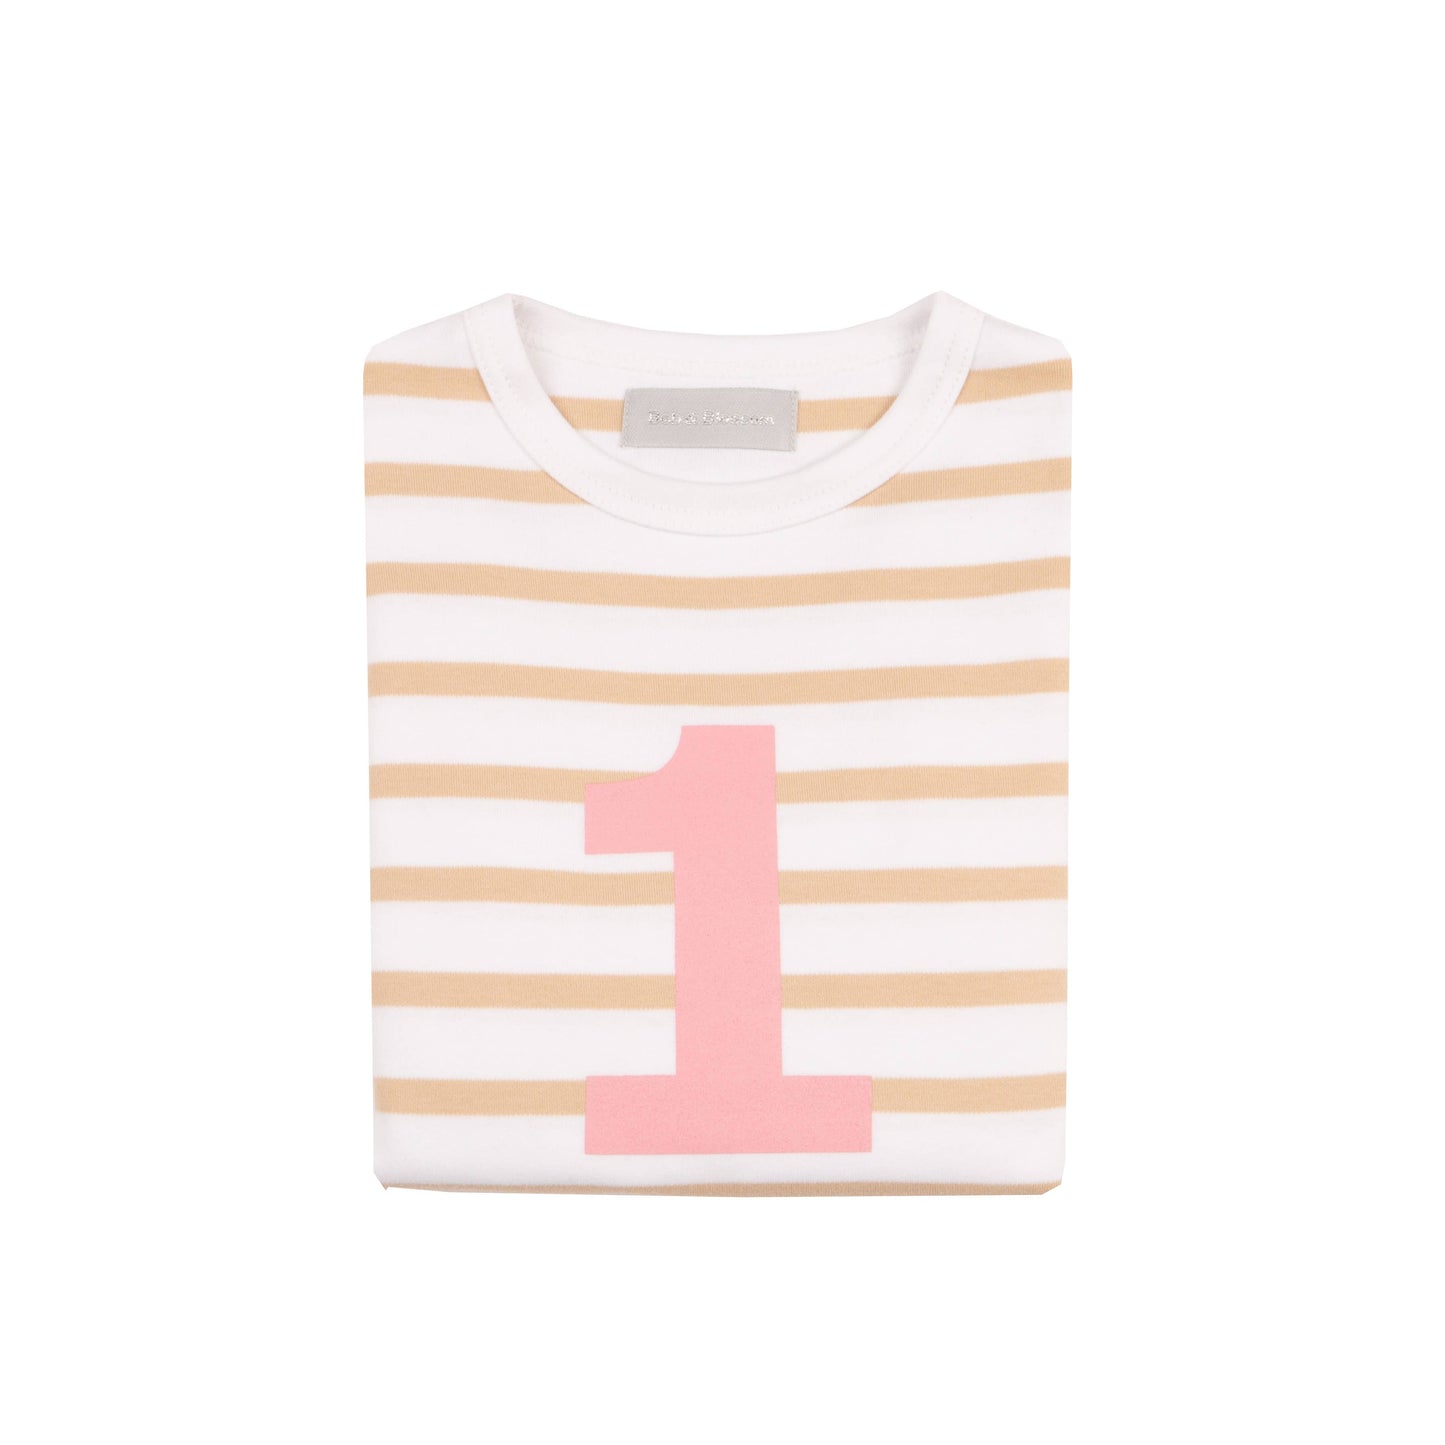 Biscuit & White Striped 1 (Pink) Shirt